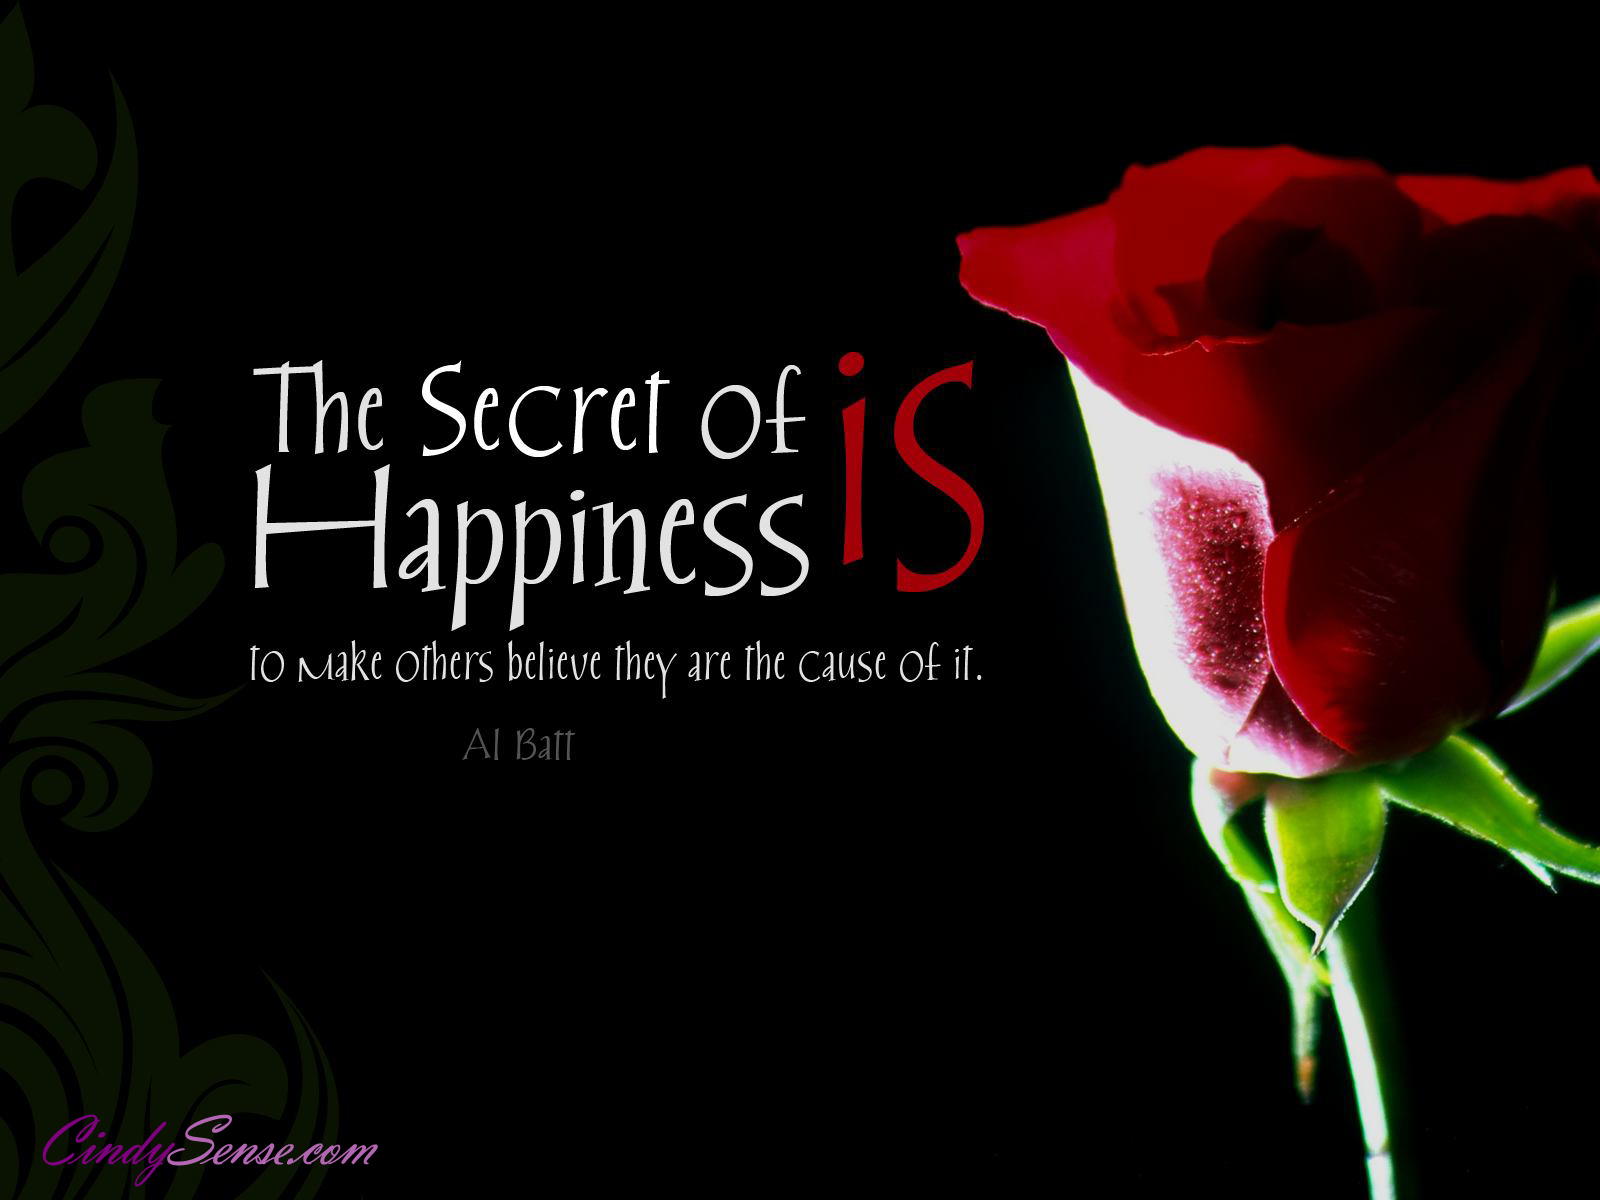 The Secret of Happiness...